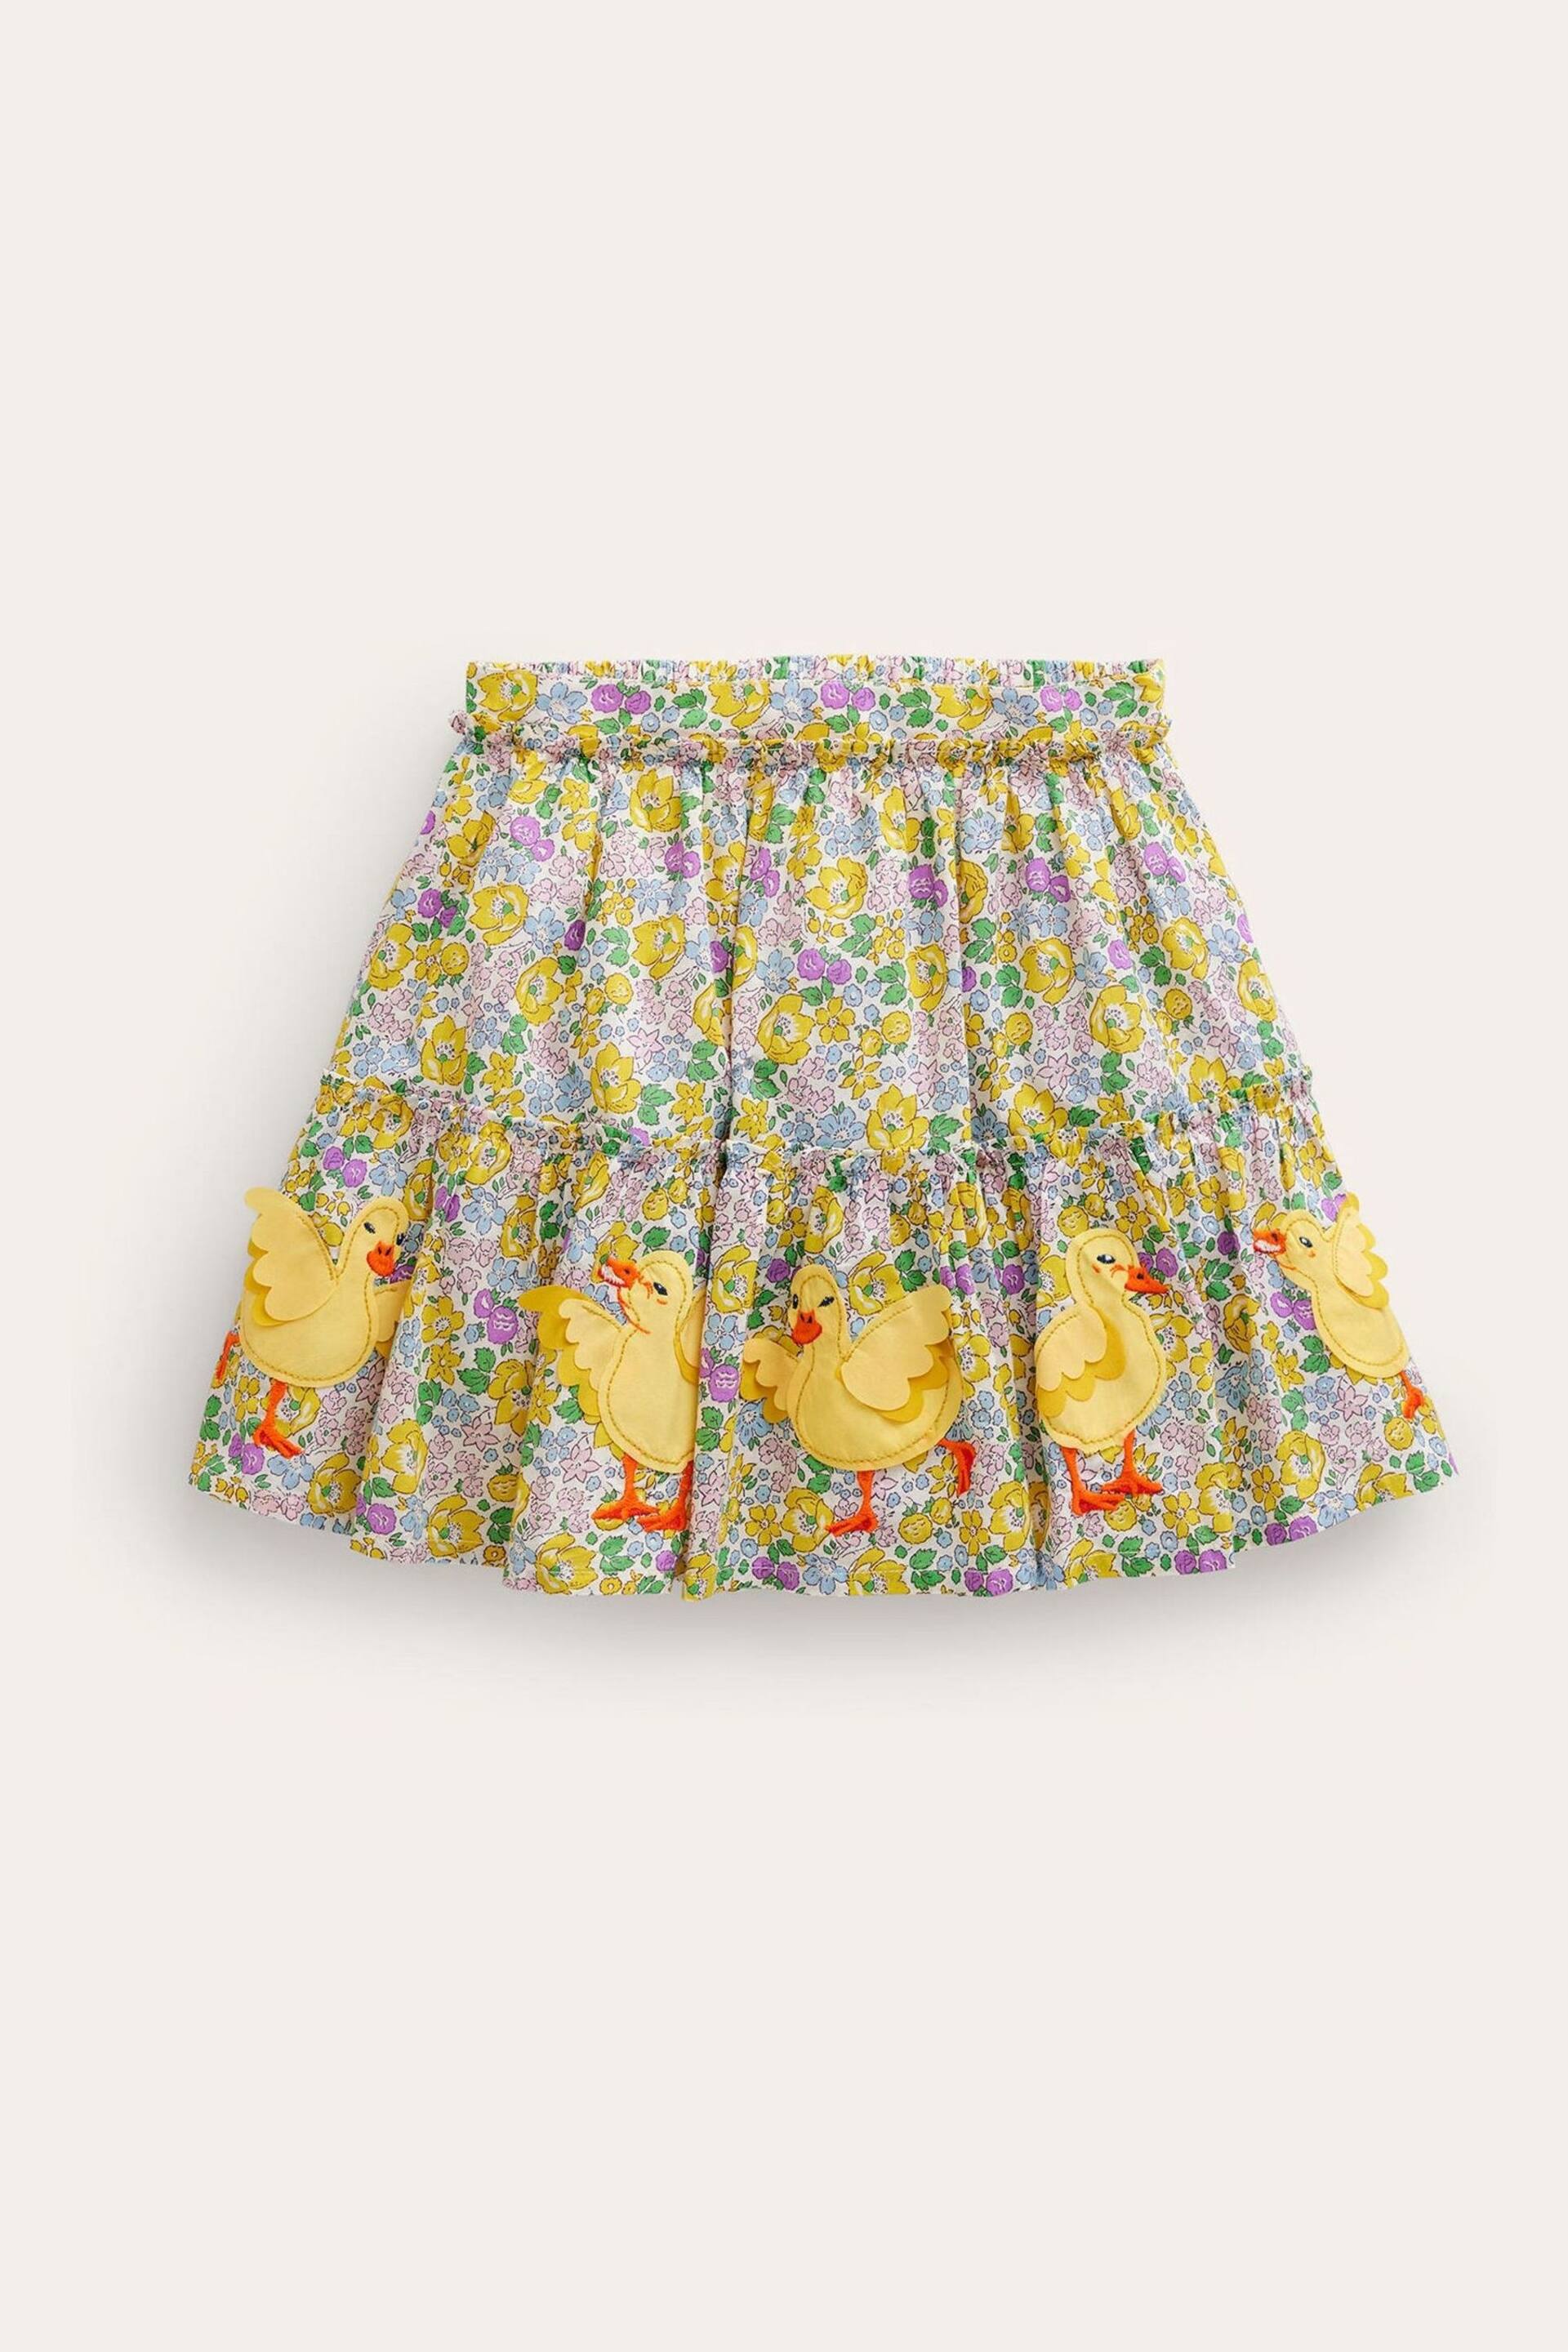 Boden Yellow Chick Appliqué Skirt - Image 2 of 3